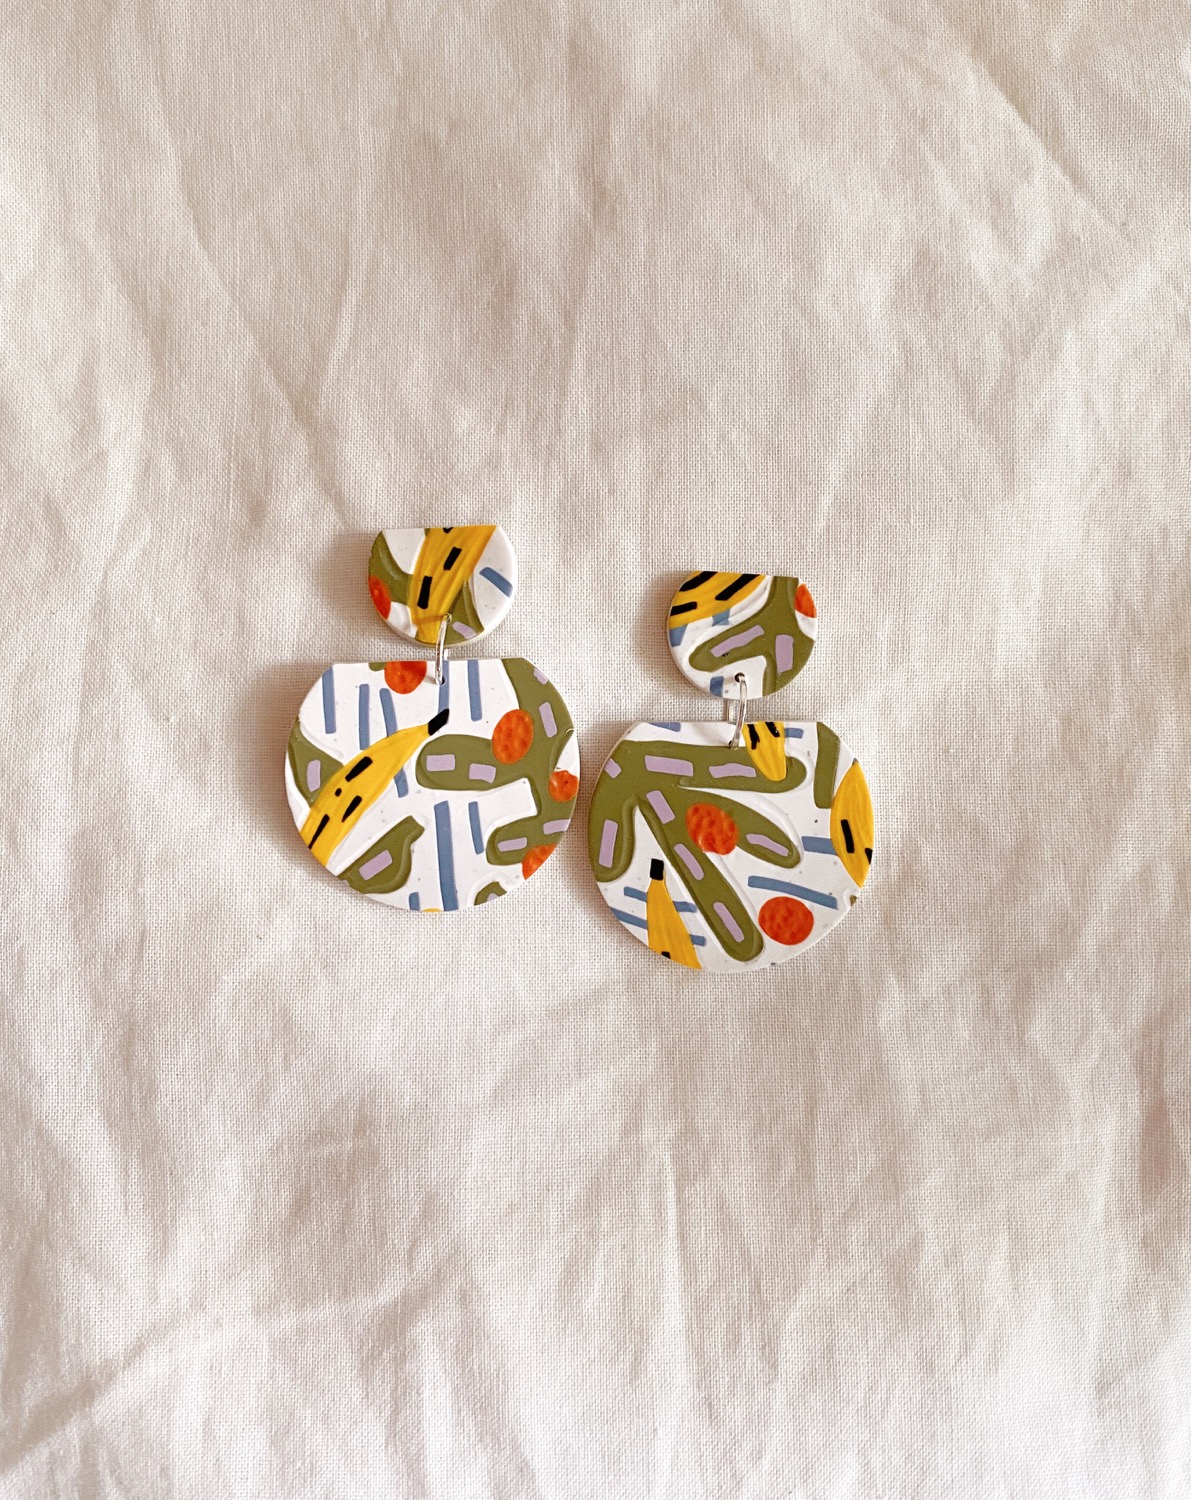 Bananas - Kahlo Polymer Clay Earrings | Polymer Clay Jewelry